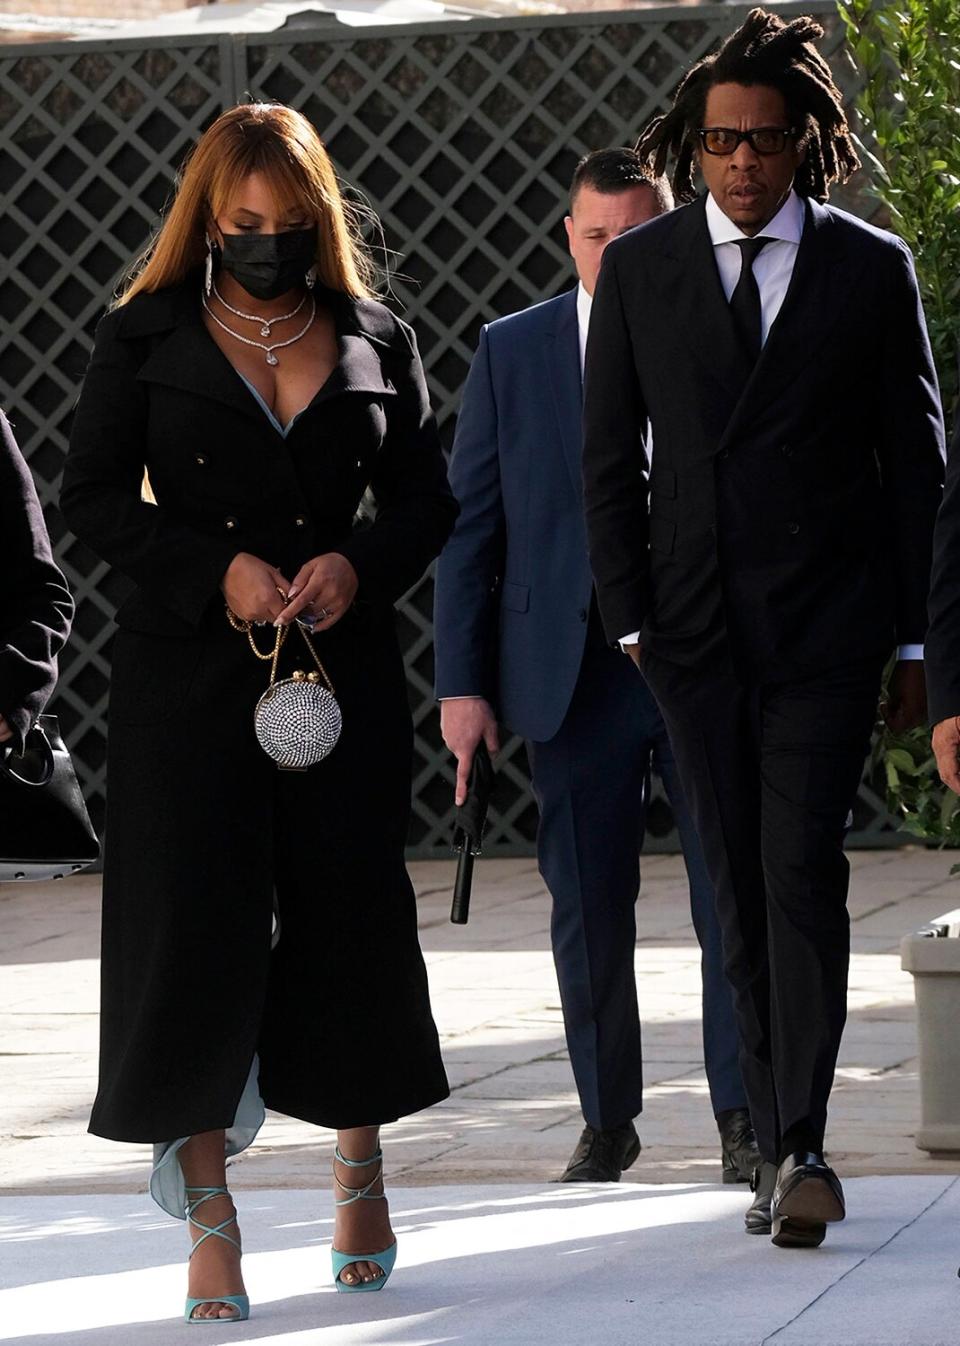 Beyonce looked glamorous as she attended with Jay Z the second wedding ceremony of Alexandre Arnault and Géraldine Guyot in Venice, Italy on October 16, 2021.